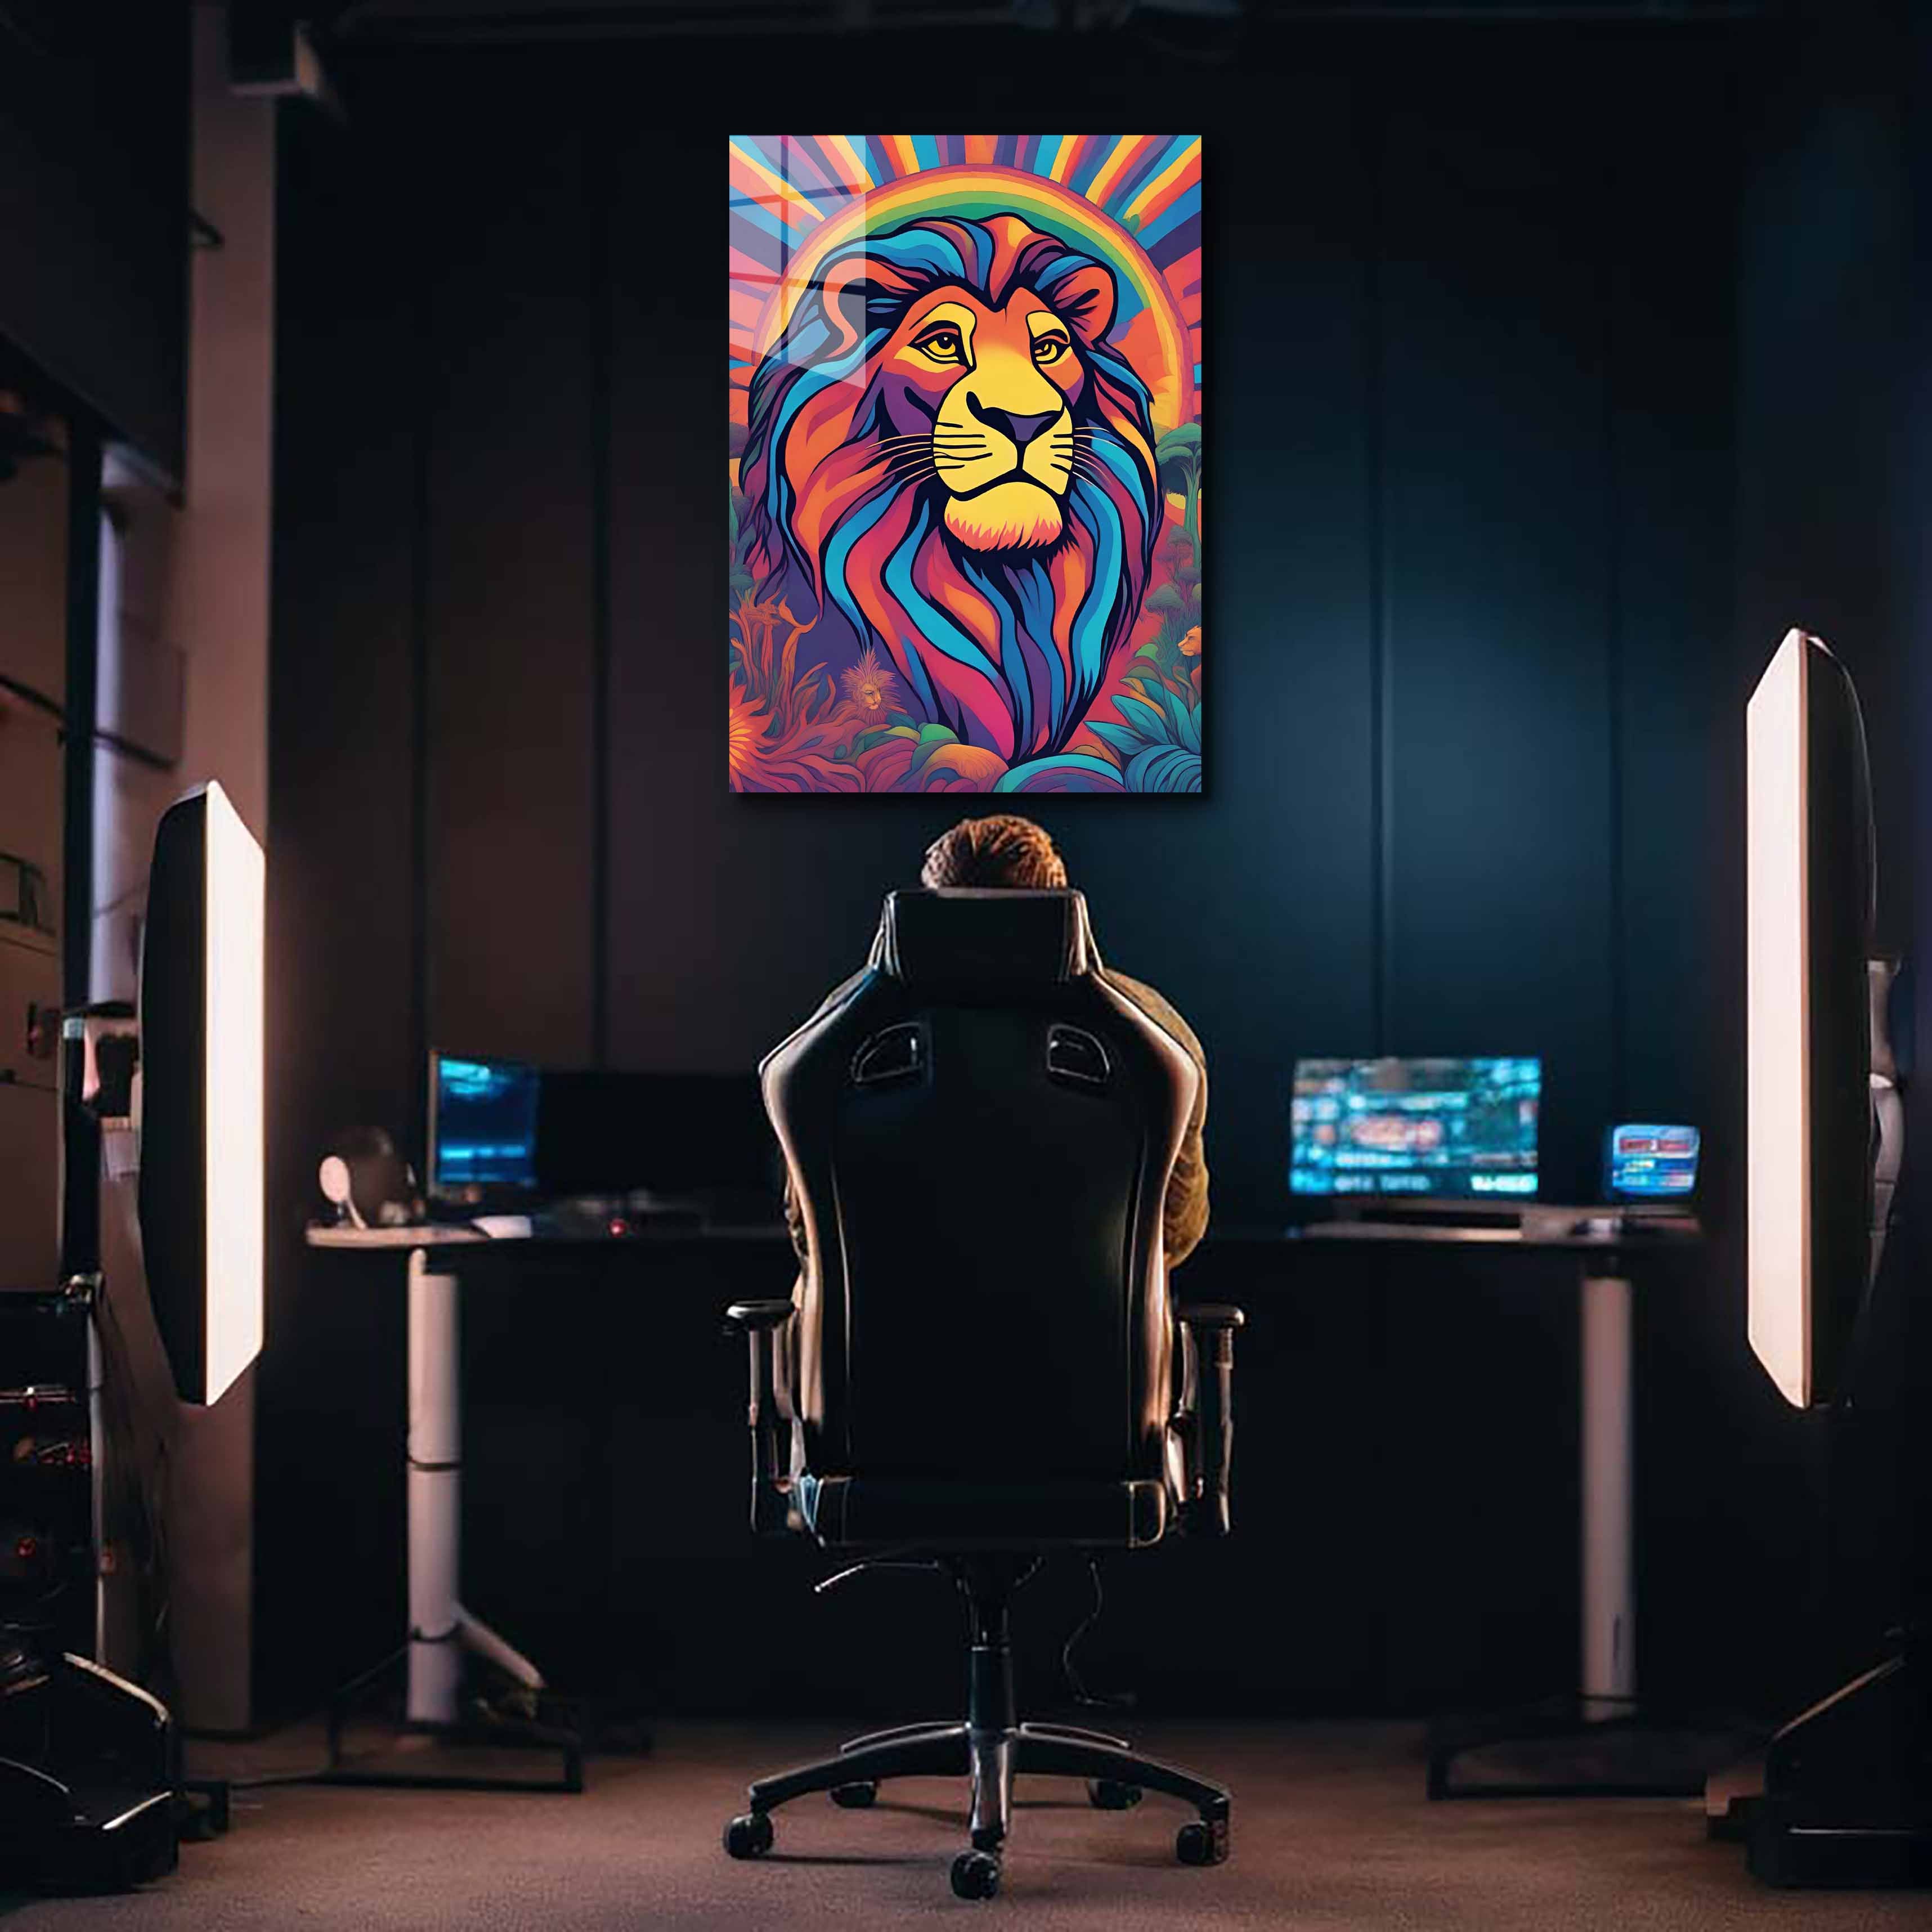 King Of The Jungle Lion-designed by @DynCreative